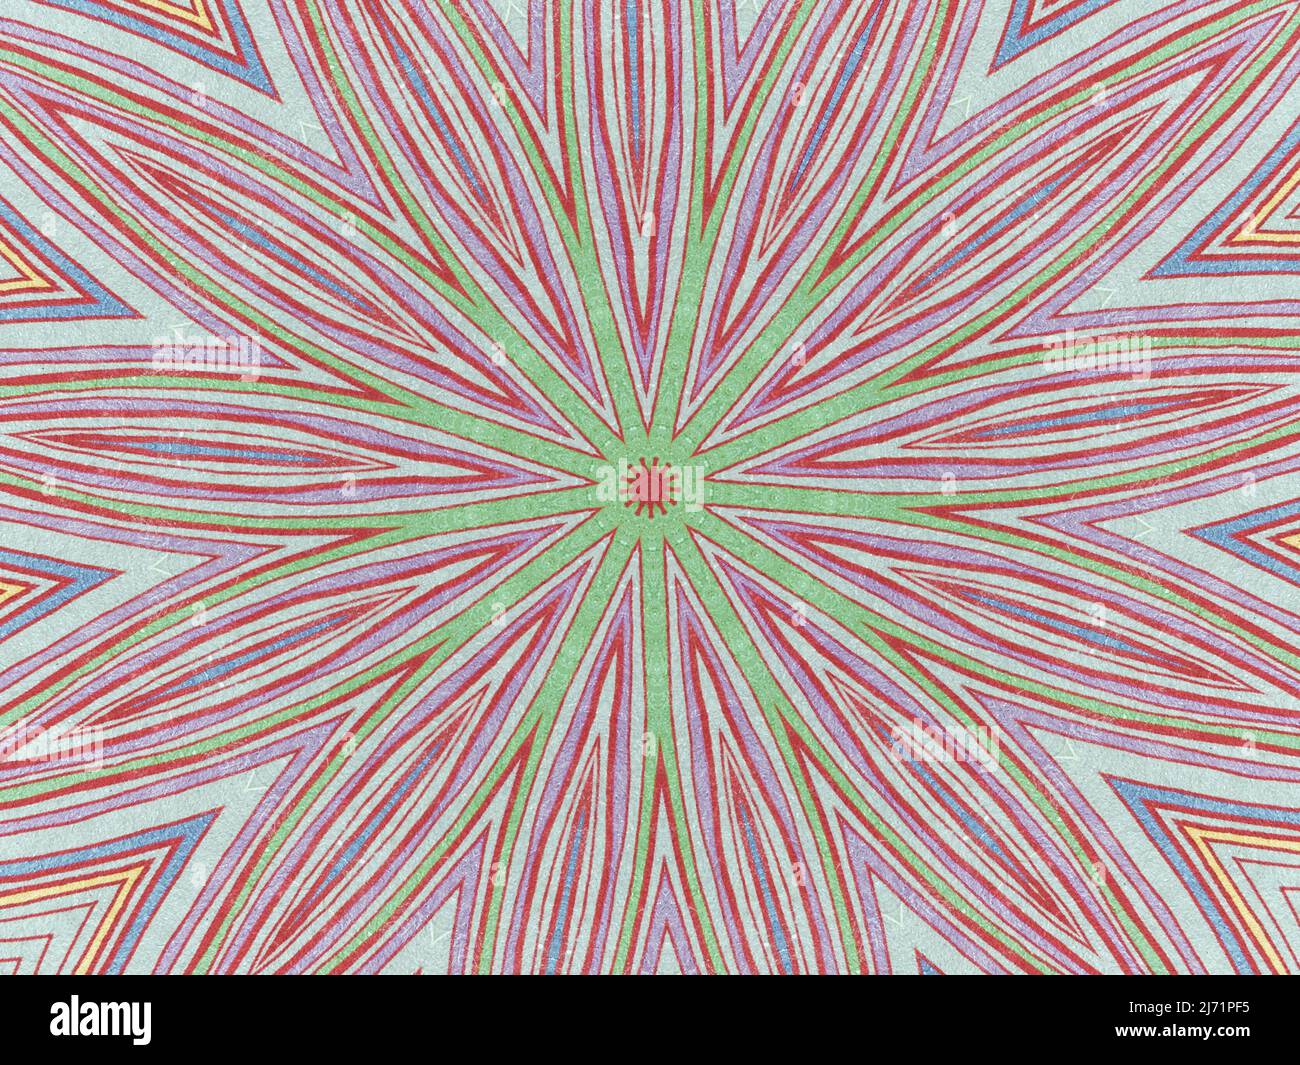 Abstract flower shape line pattern psychedelic illustration. Stock Photo